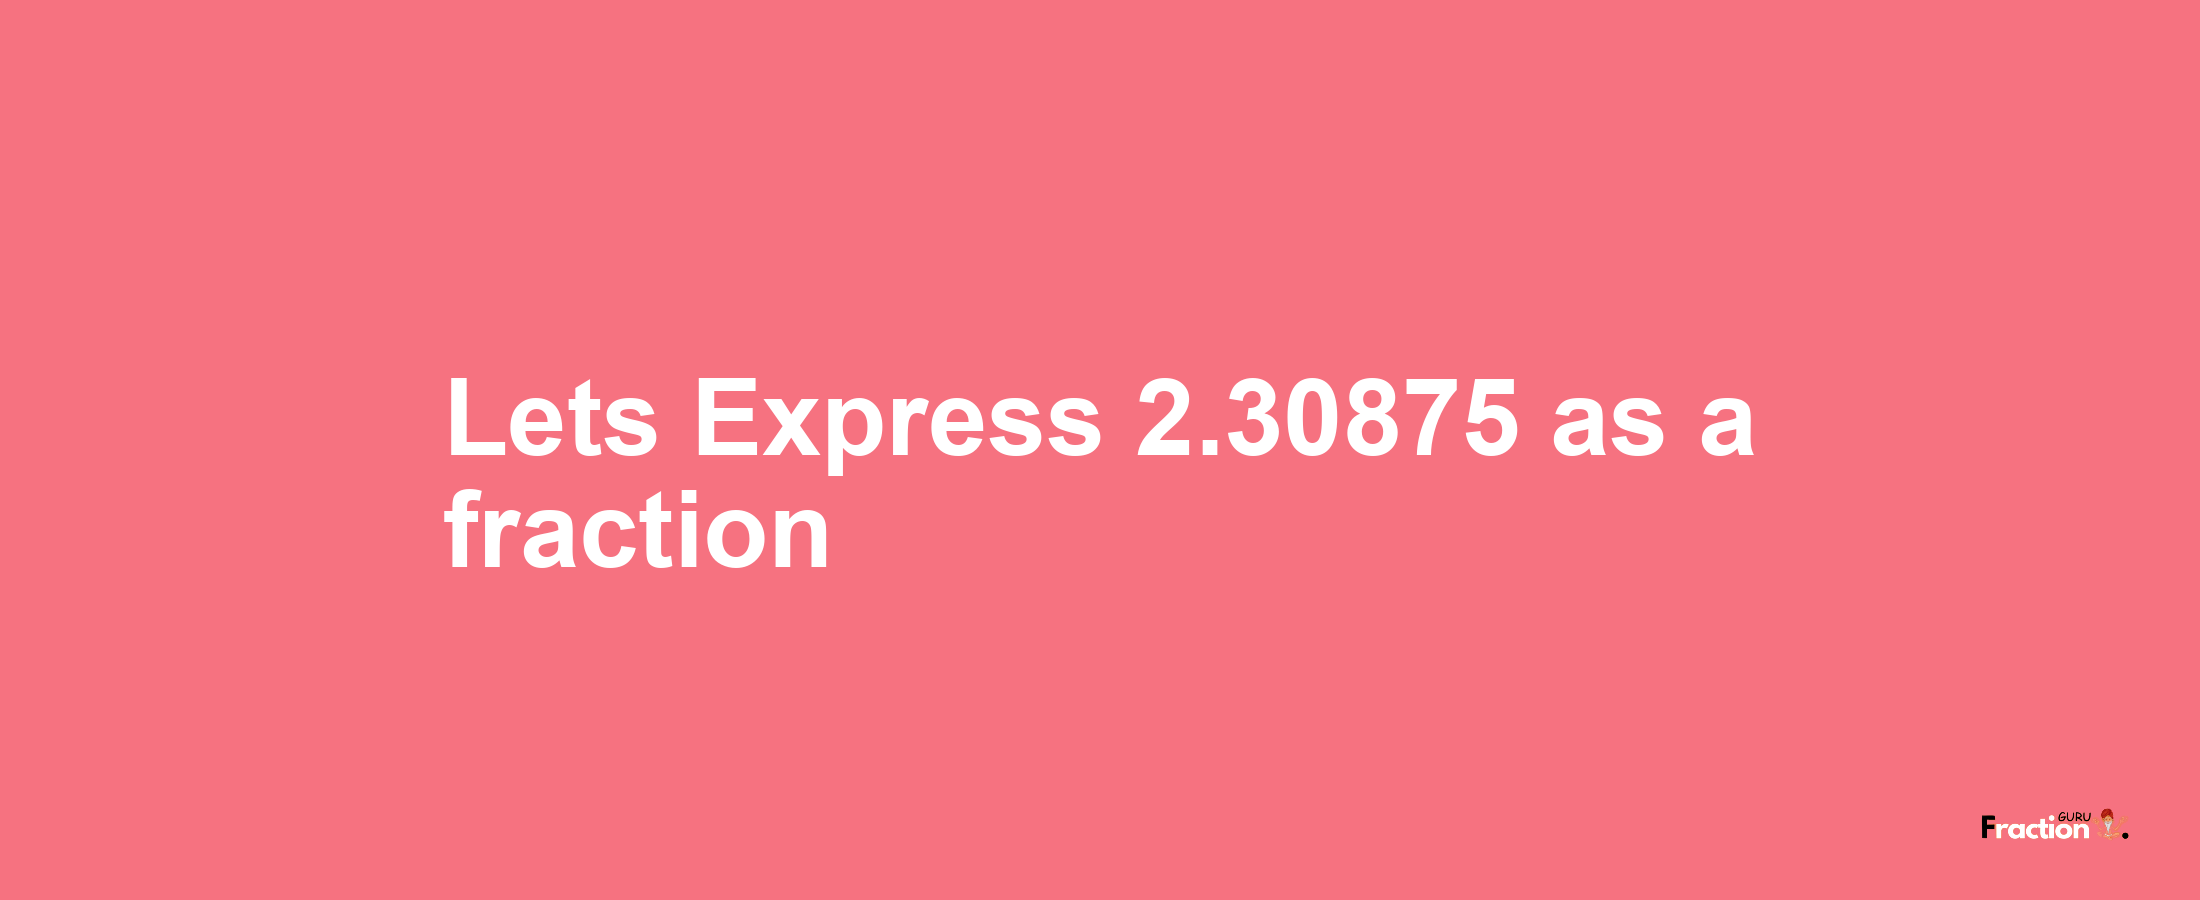 Lets Express 2.30875 as afraction